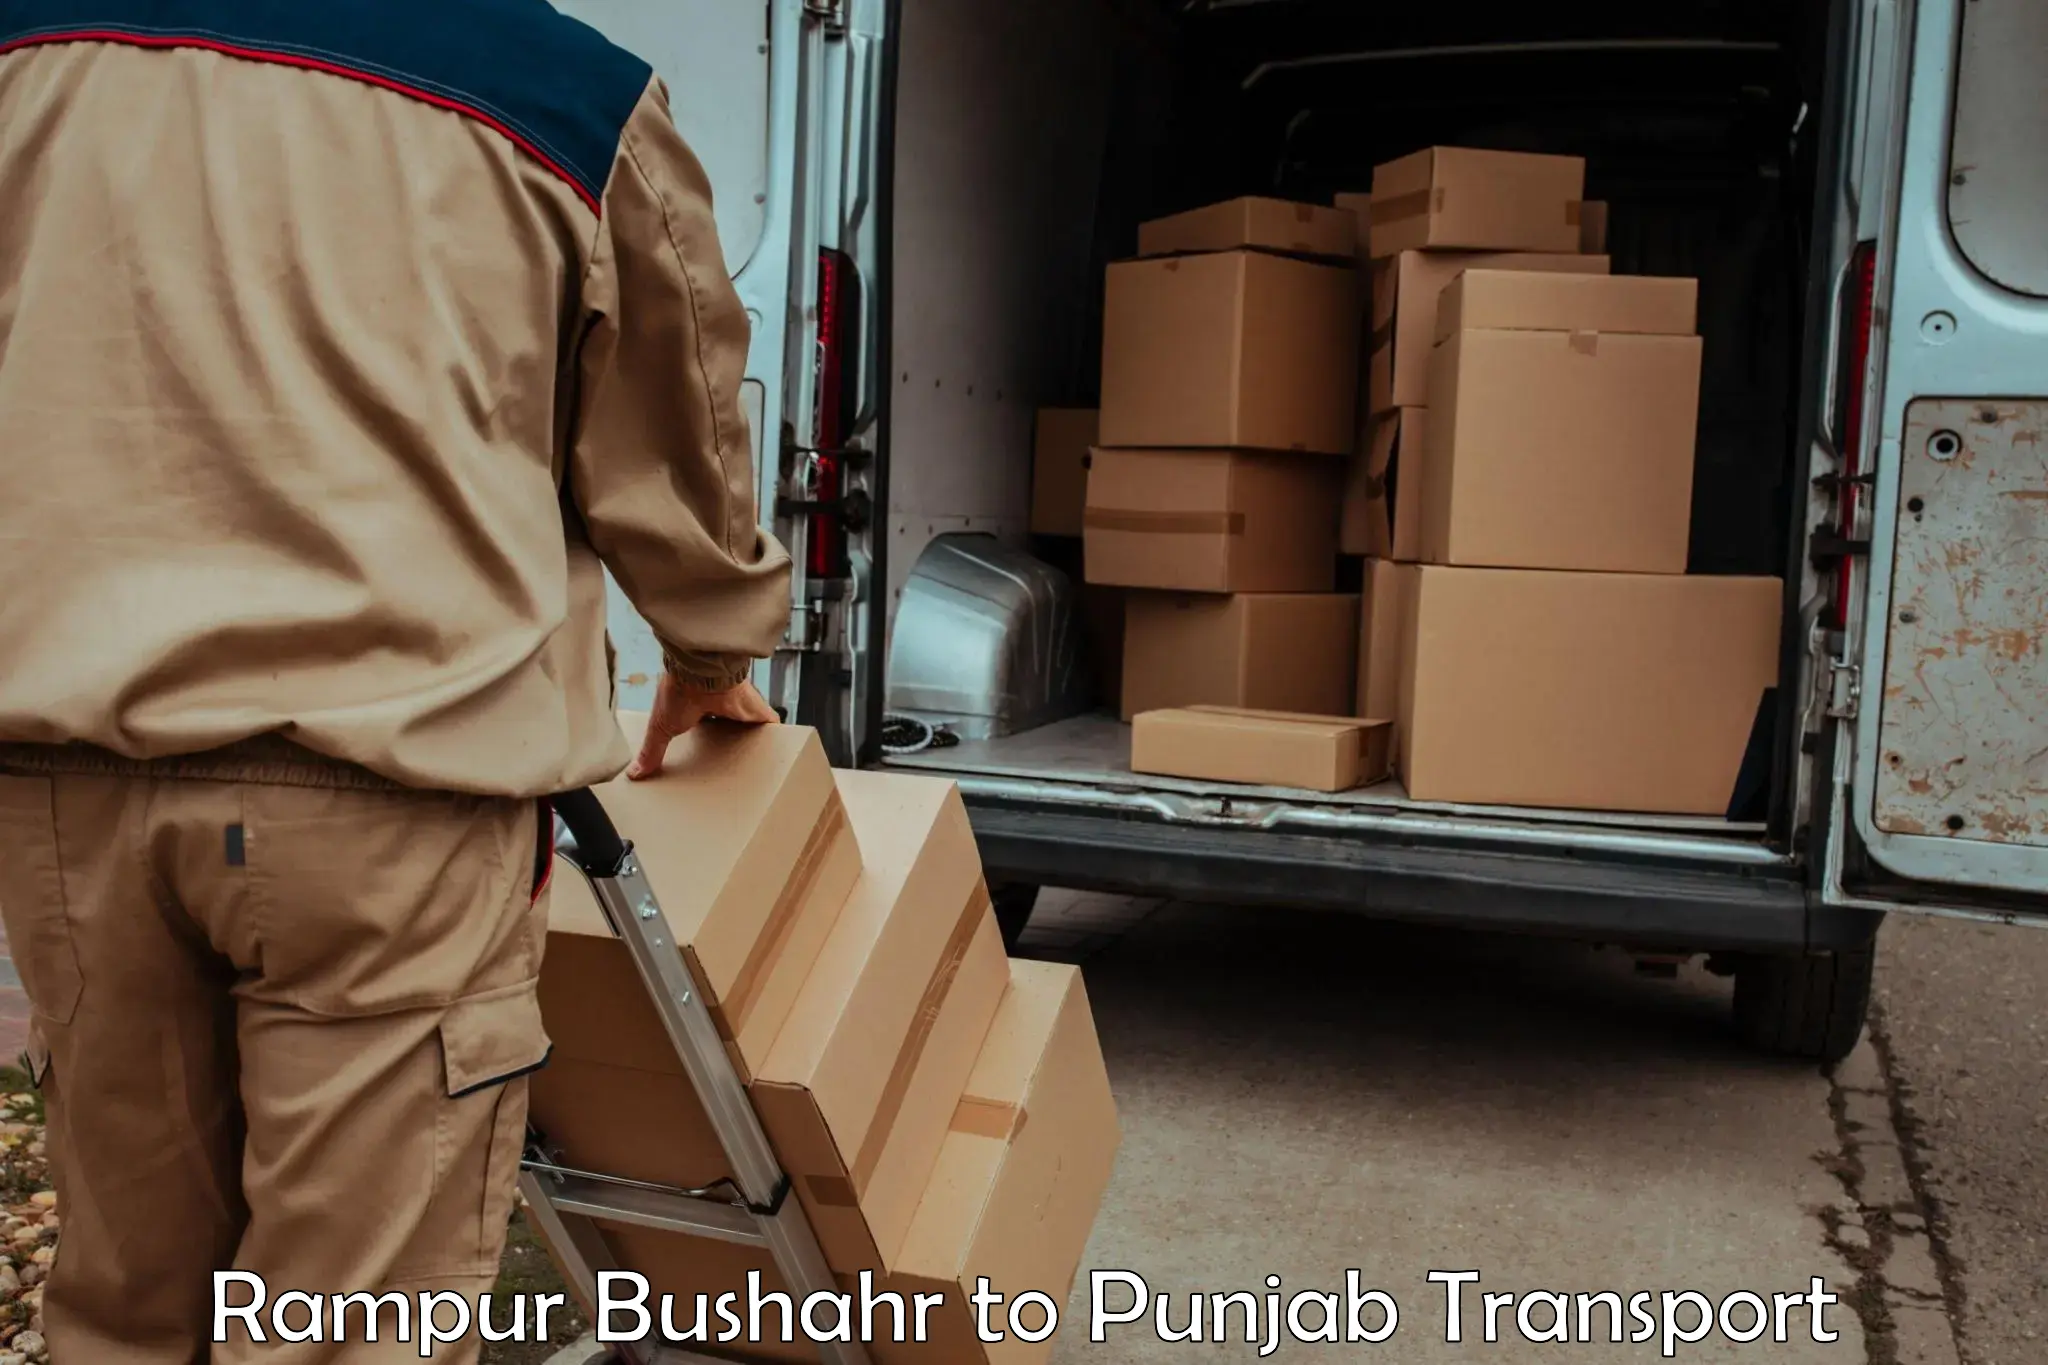 Container transport service Rampur Bushahr to Sultanpur Lodhi